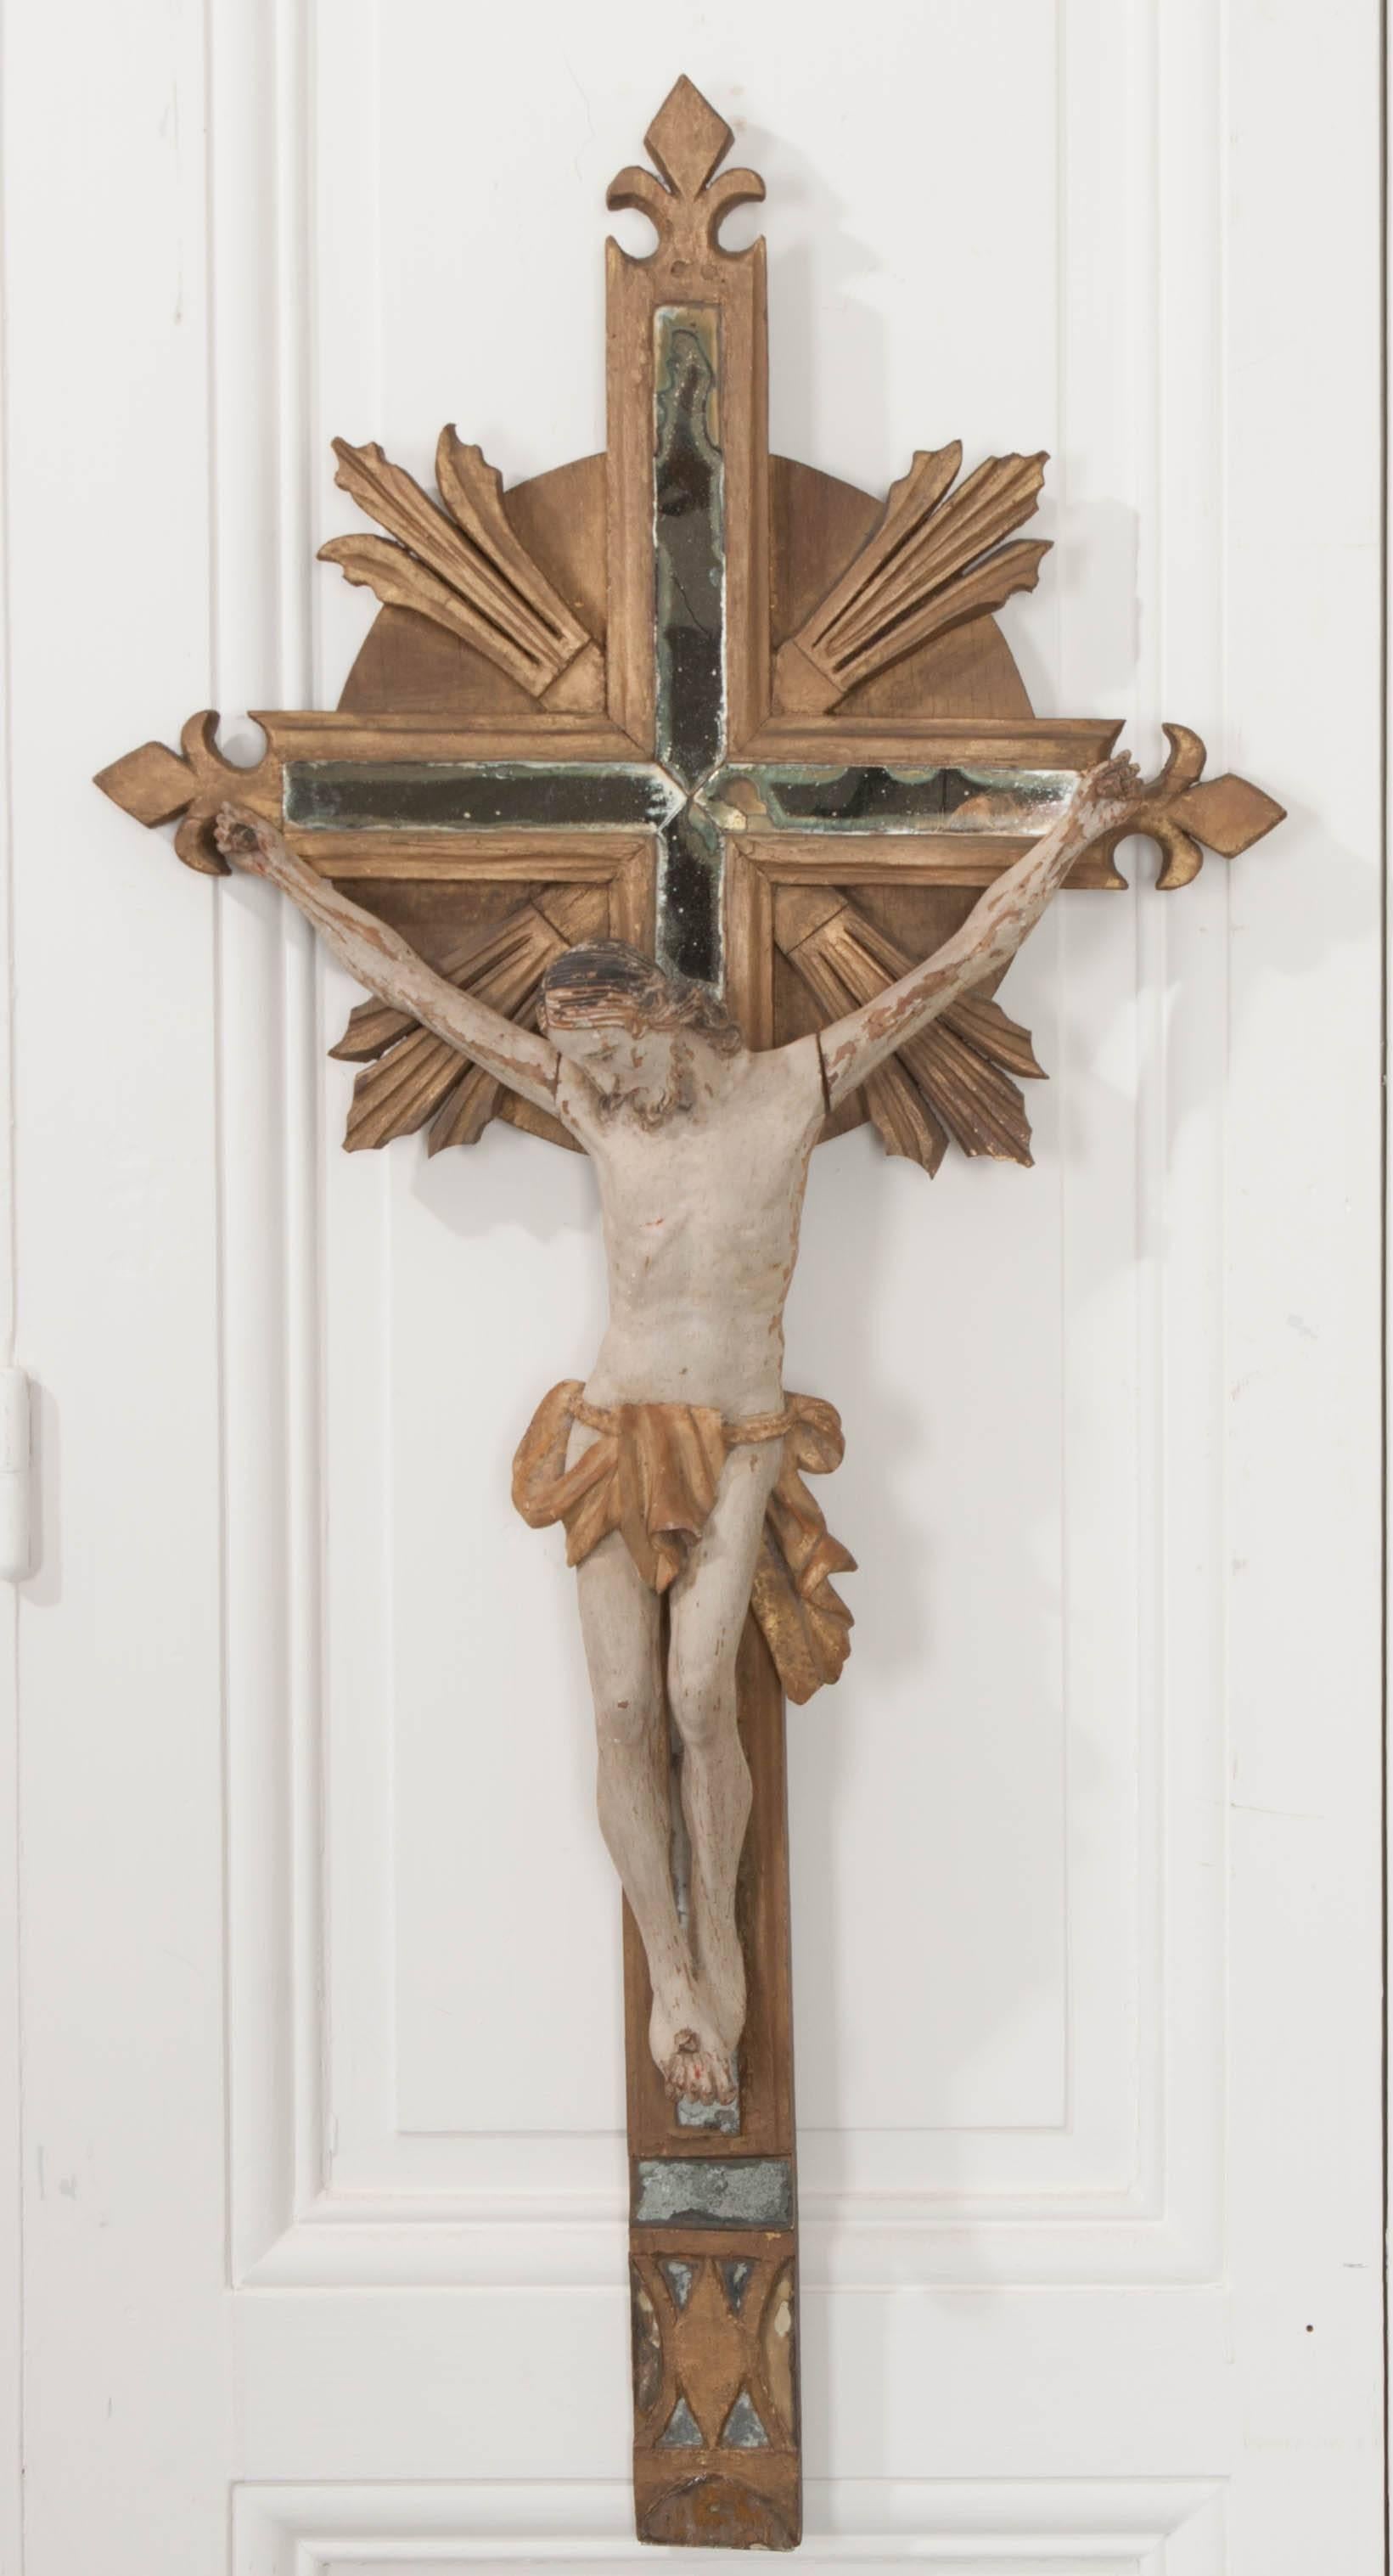 A remarkable hand-carved crucifix from 19th century France. This extraordinary religious artifact has been finished in a beautiful gold gilt and was made with antique mercury glass set into the cross. This glass is impeccably well-aged and adds to